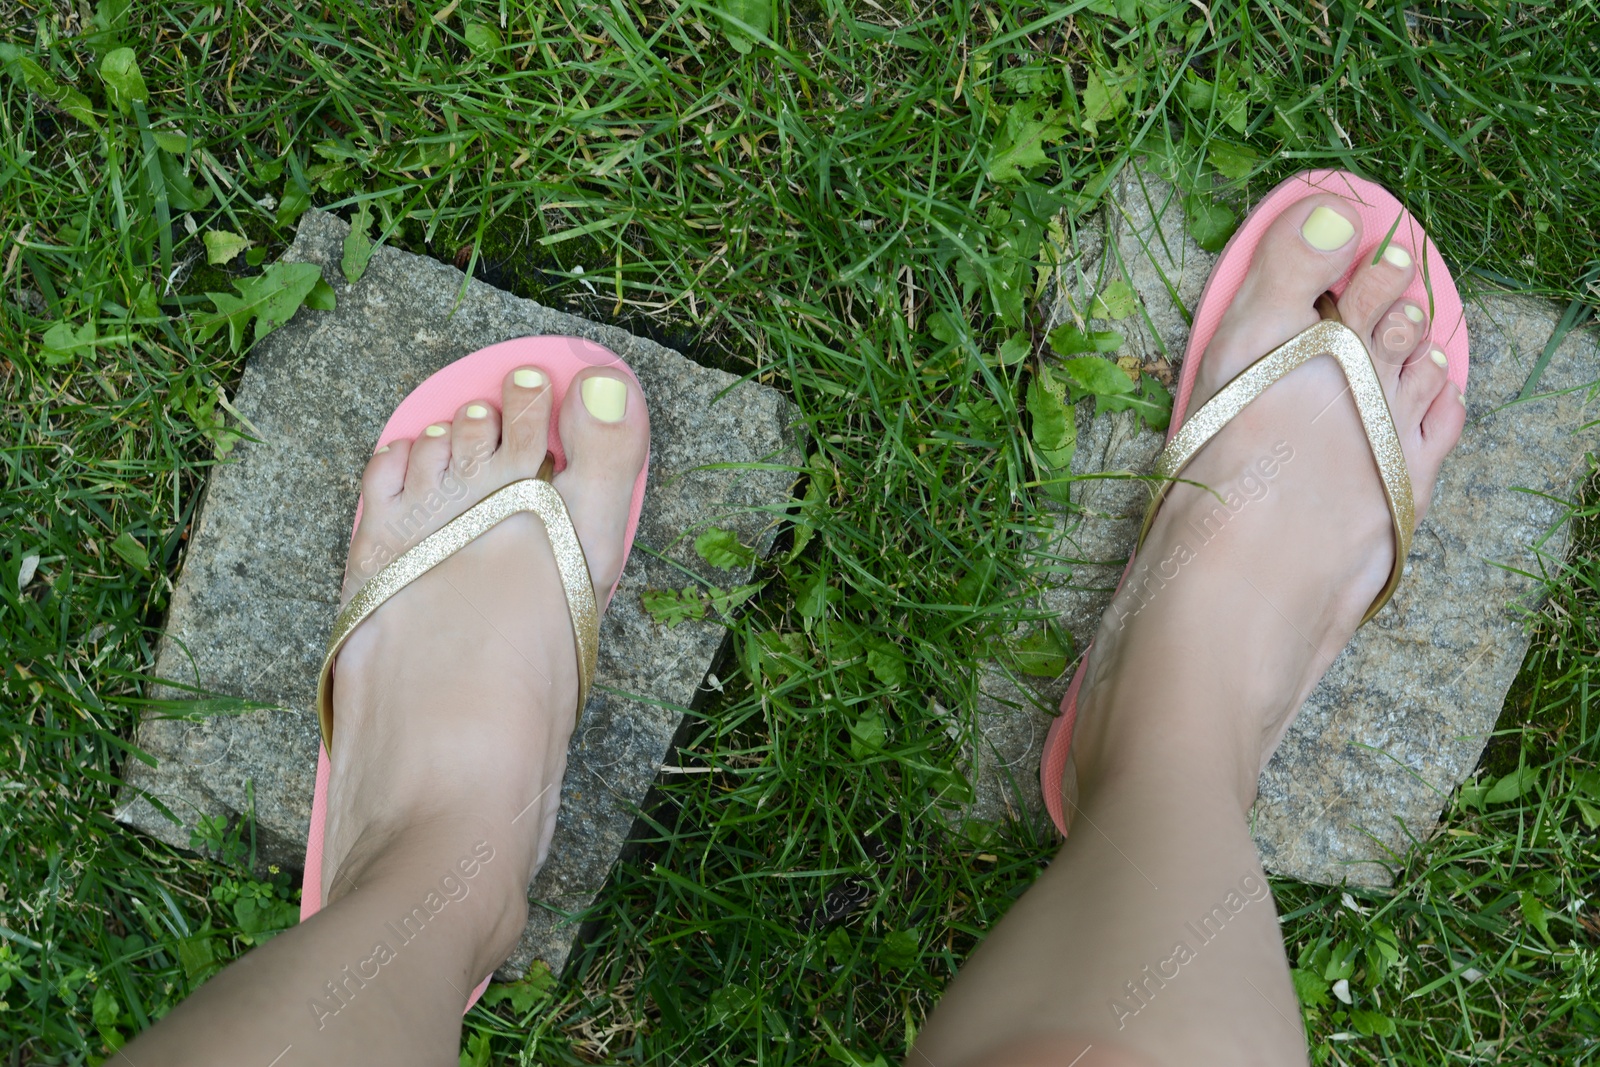 Photo of Woman wearing stylish flip flops on green grass outdoors, top view